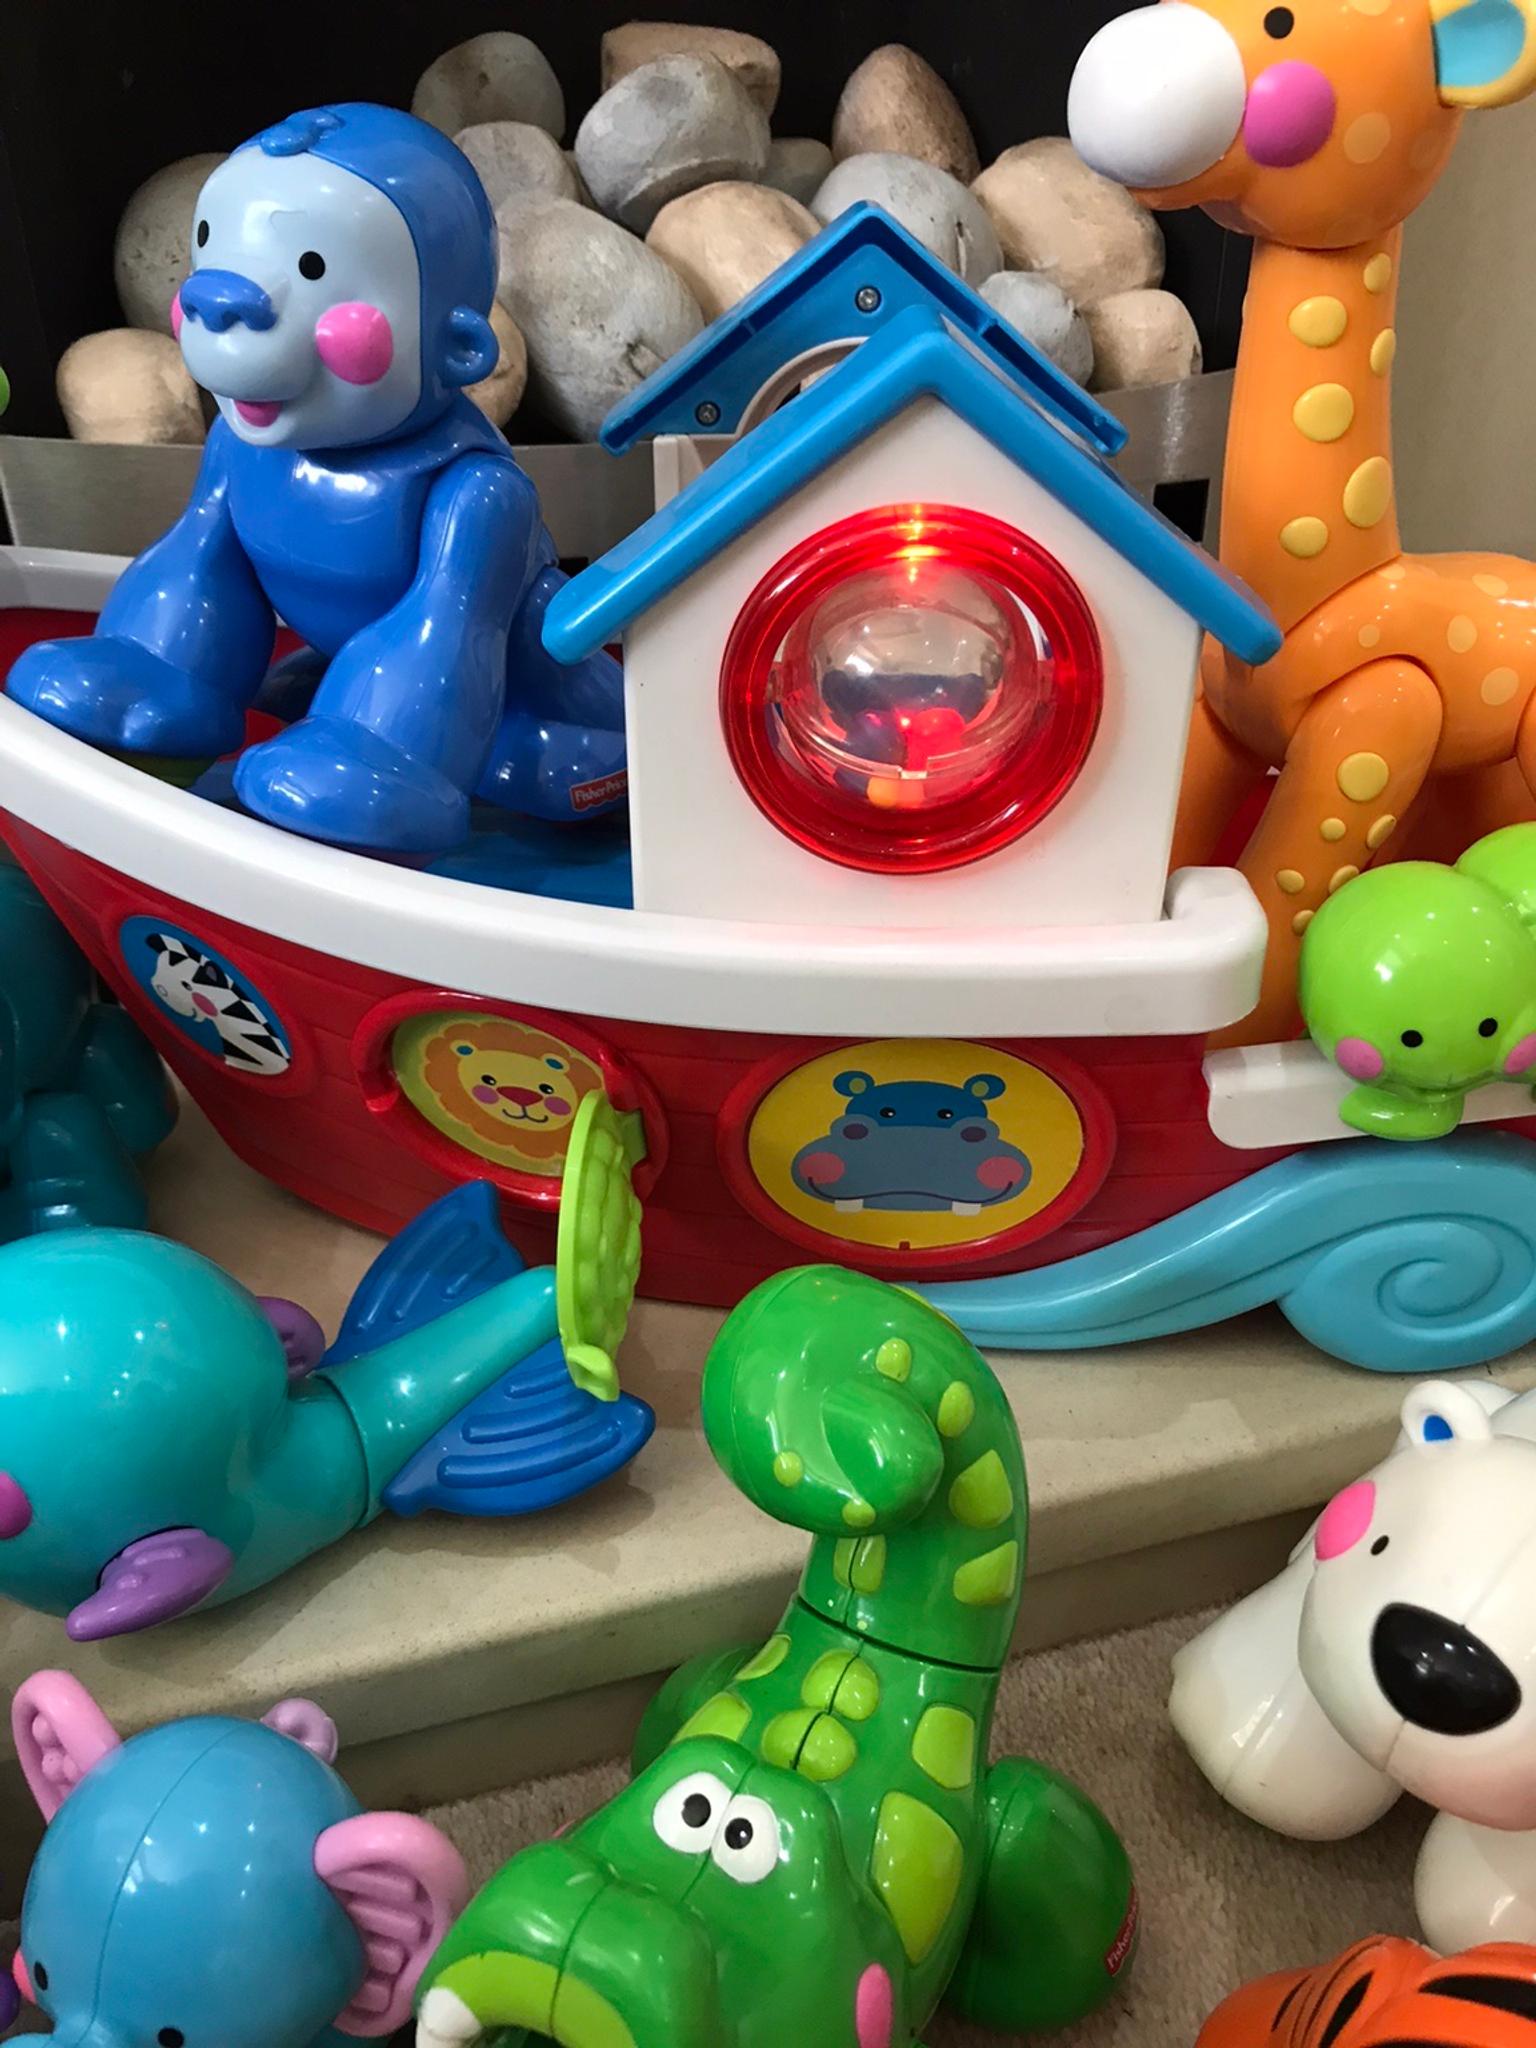 fisher price boat with animals